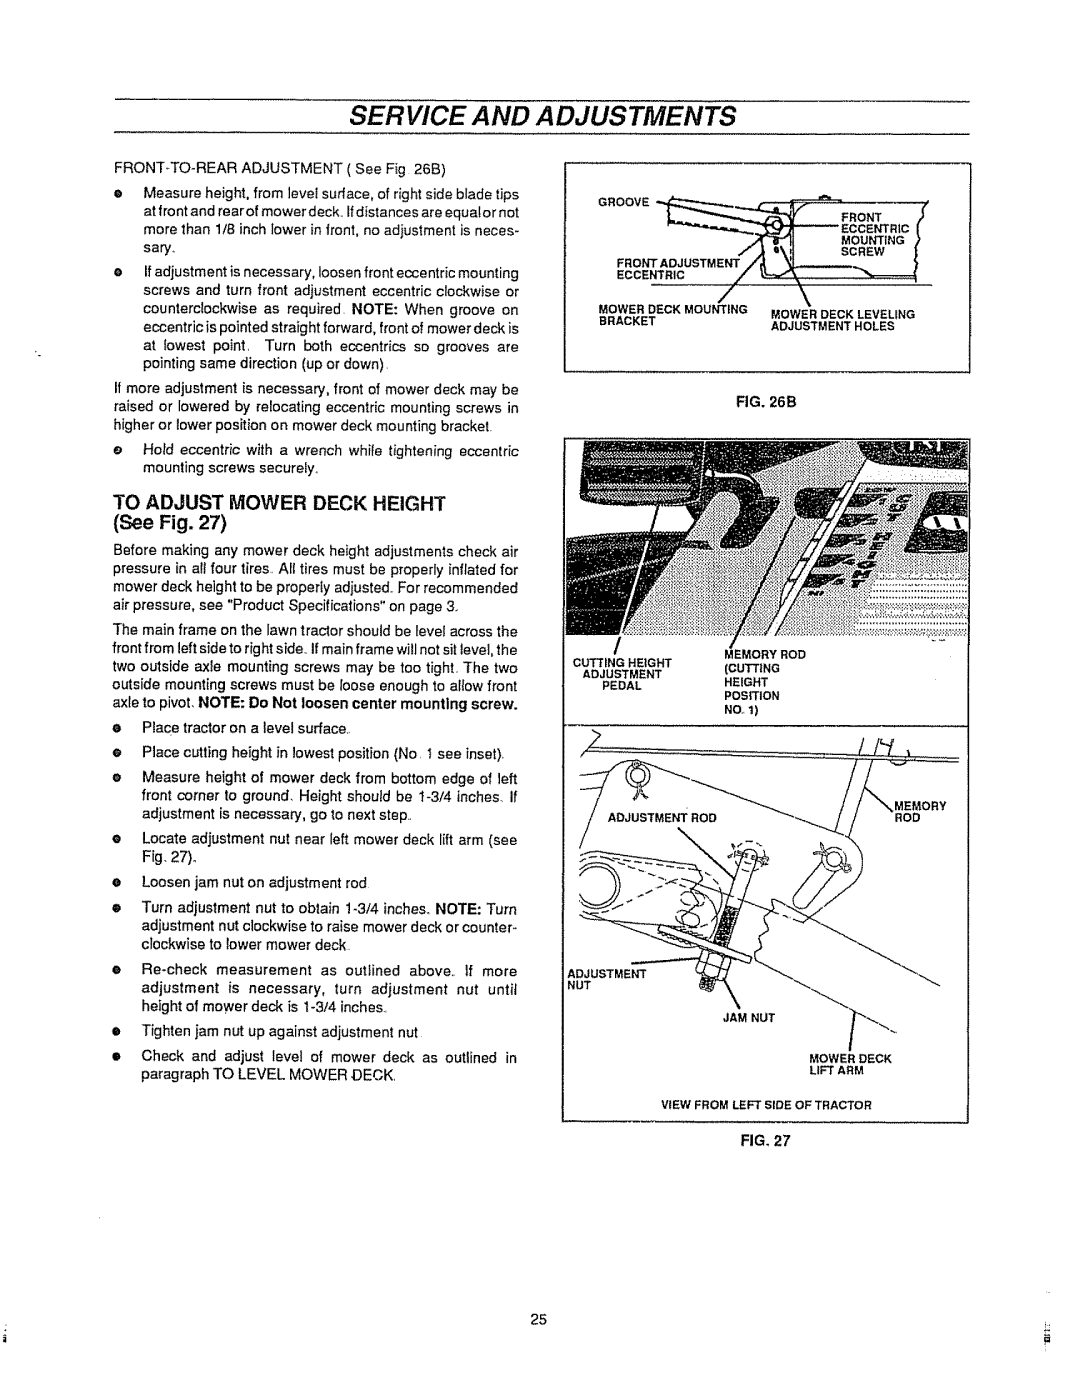 Sears 536.25587 owner manual Service And Adjustments, Qroove__, TO ADJUST MOWER DECK HEIGHT See Fig 